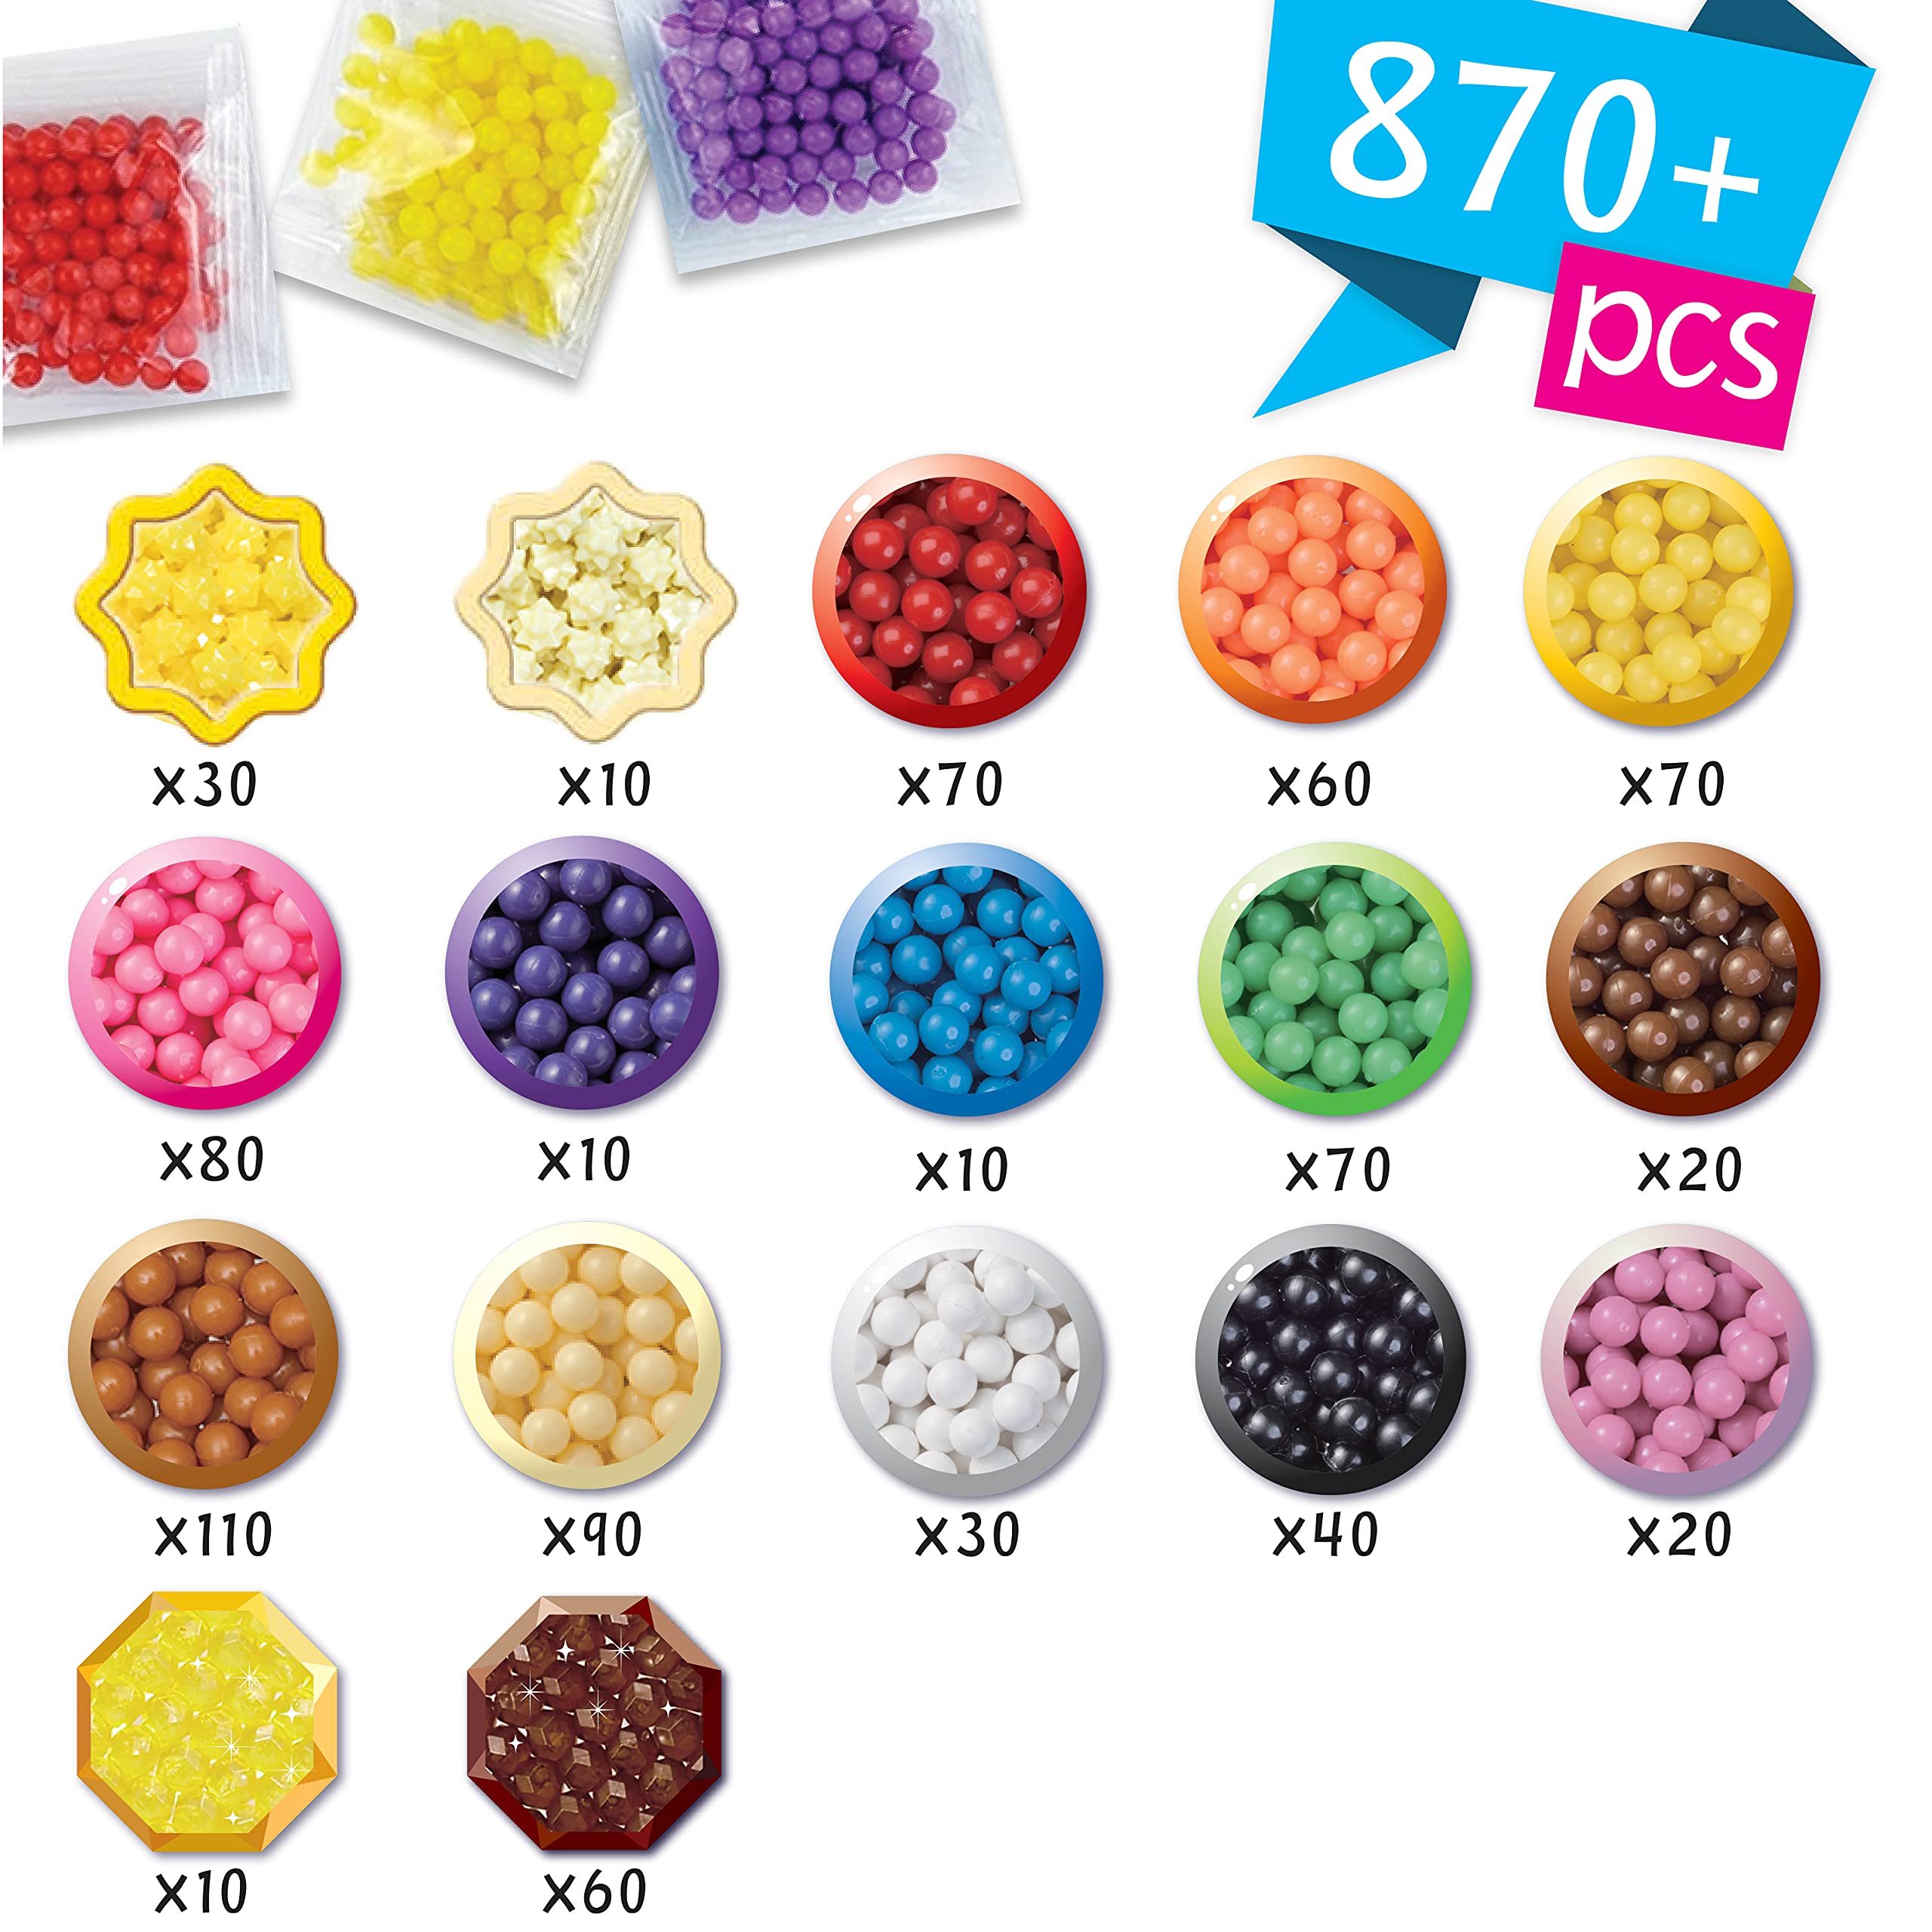 Aquabeads Animal Crossing™ : New Horizons Character Set, Kids, Beads, Arts and Crafts, Complete Activity Kit for 4+